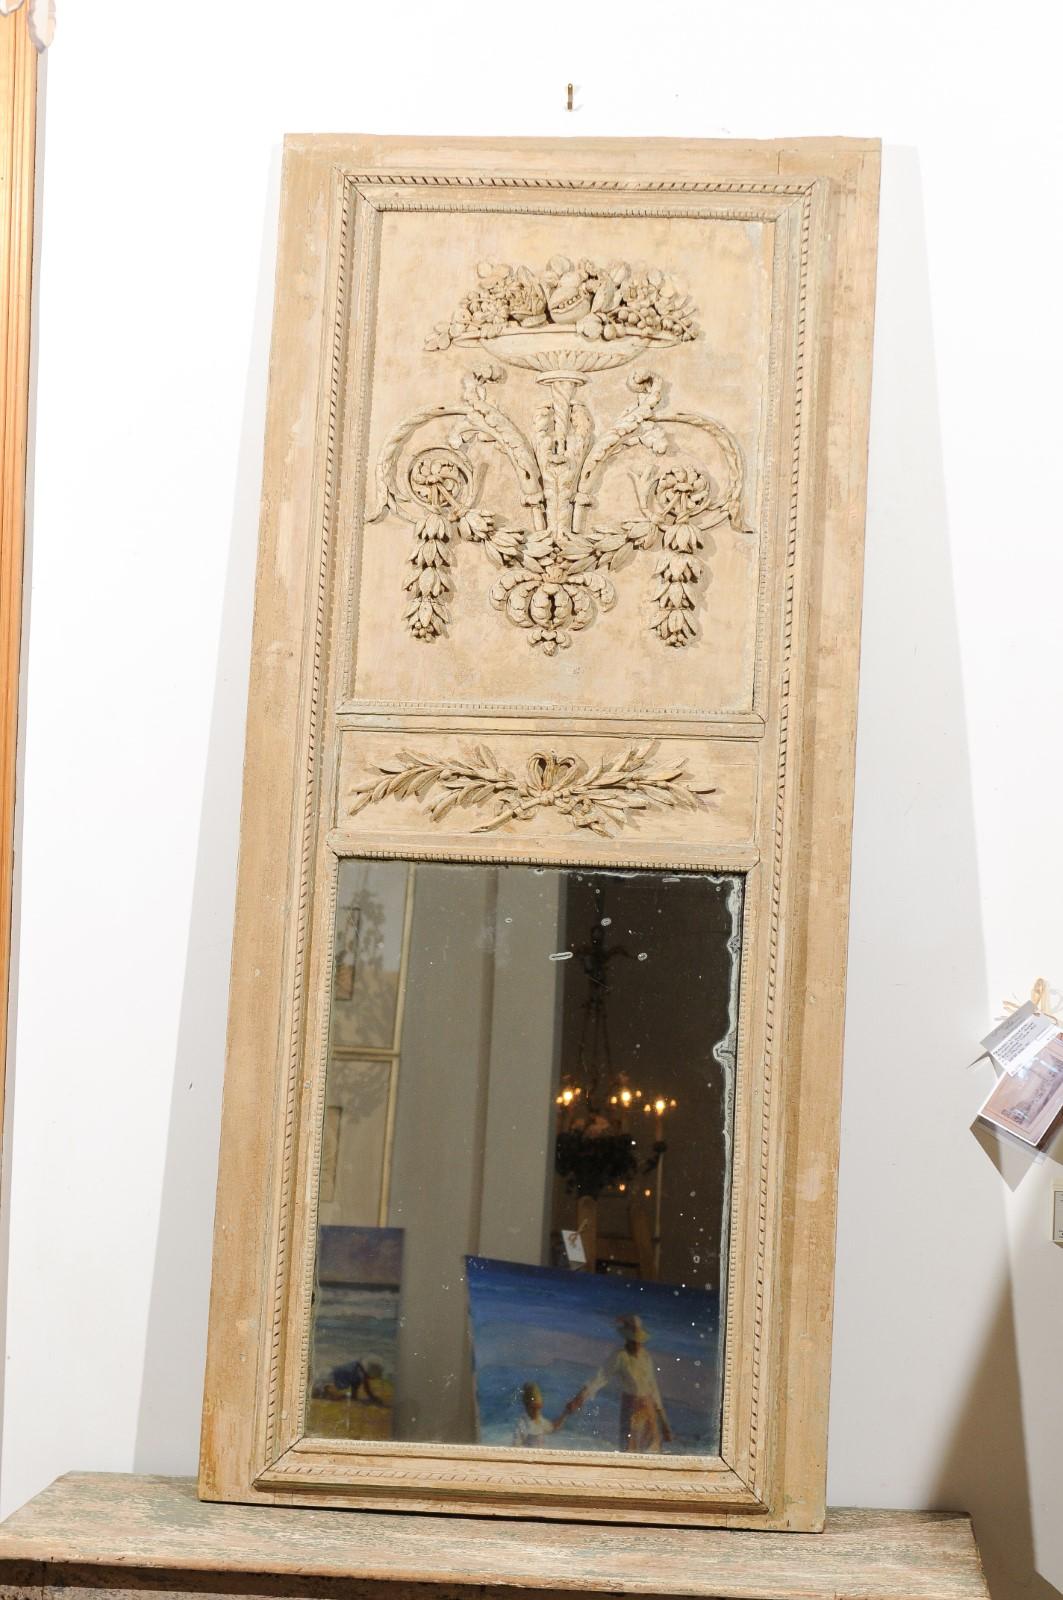 A French painted wood Louis XVI period trumeau mirror from the late 18th century, with foliage, scrollwork and urn motifs. Born in France at the end of the Age of Enlightenment, this Louis XVI trumeau mirror features a linear Silhouette, beautifully